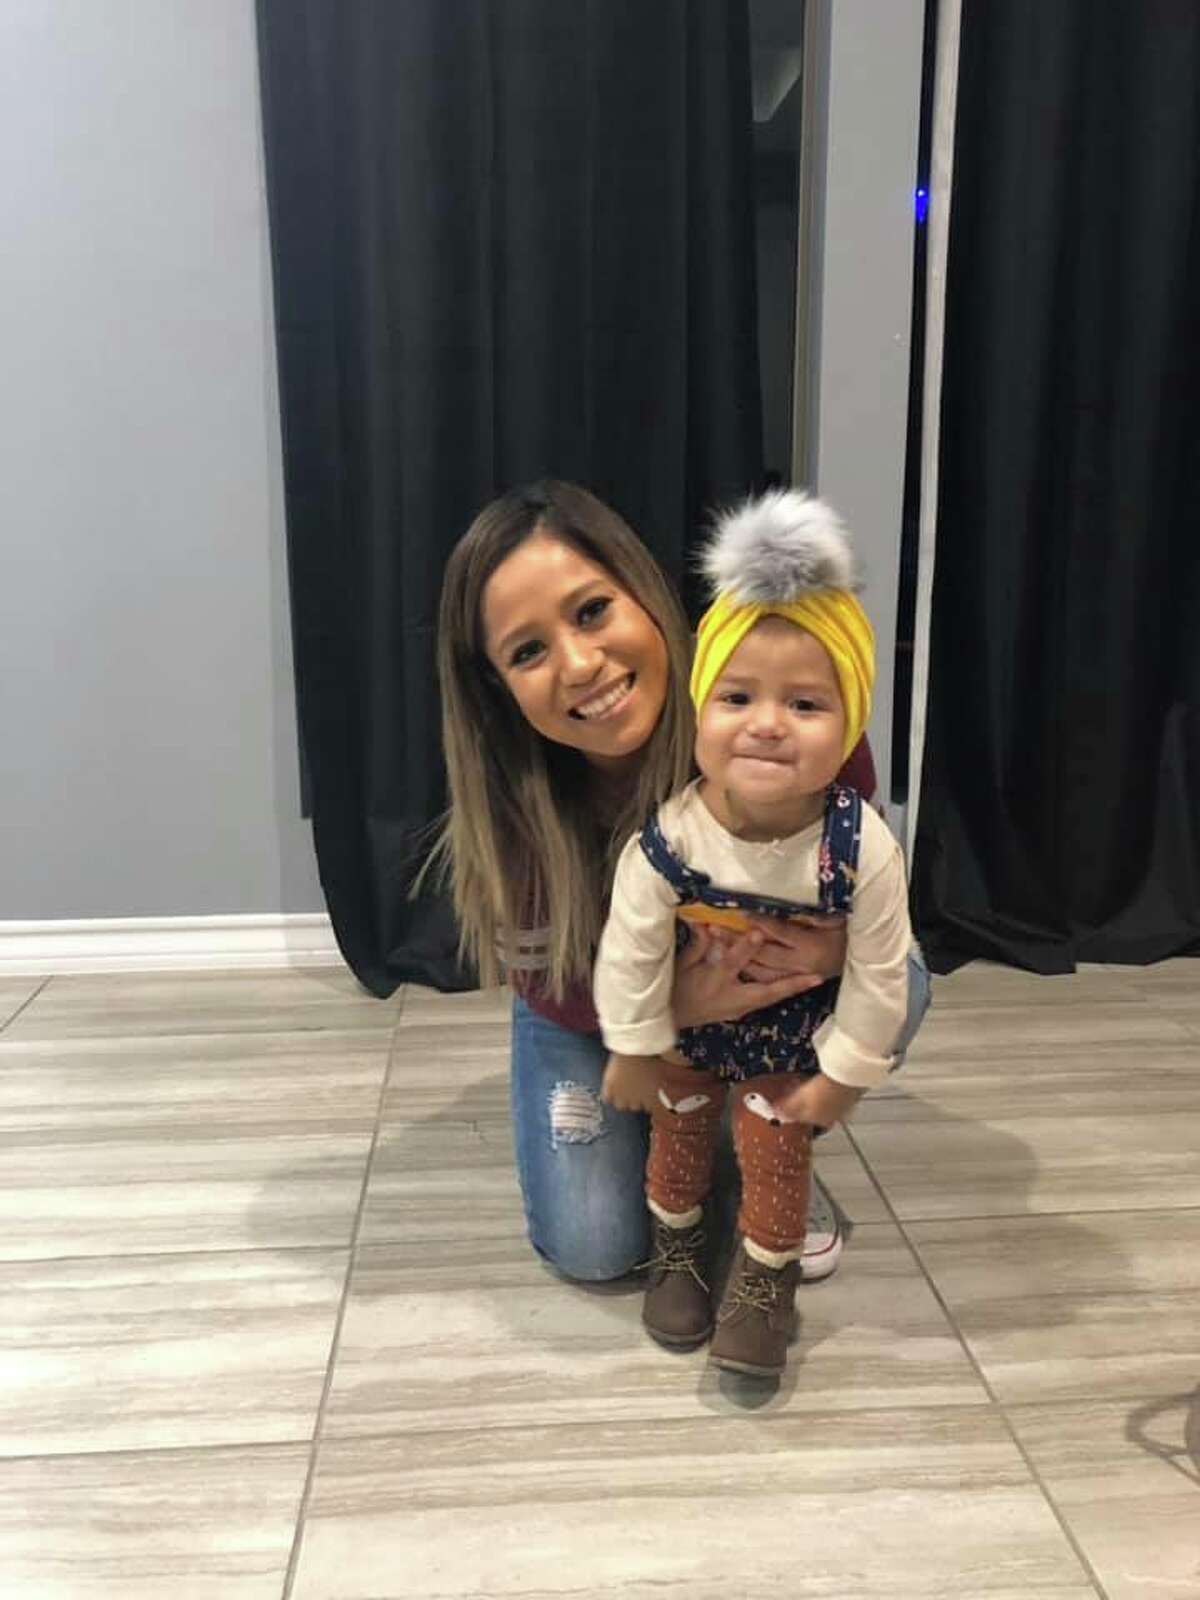 A blood and marrow registry drive will be held this weekend in honor of Bella Sanchez. Sanchez, 2, is currently being treated at Methodist Children’s Hospital in San Antonio.